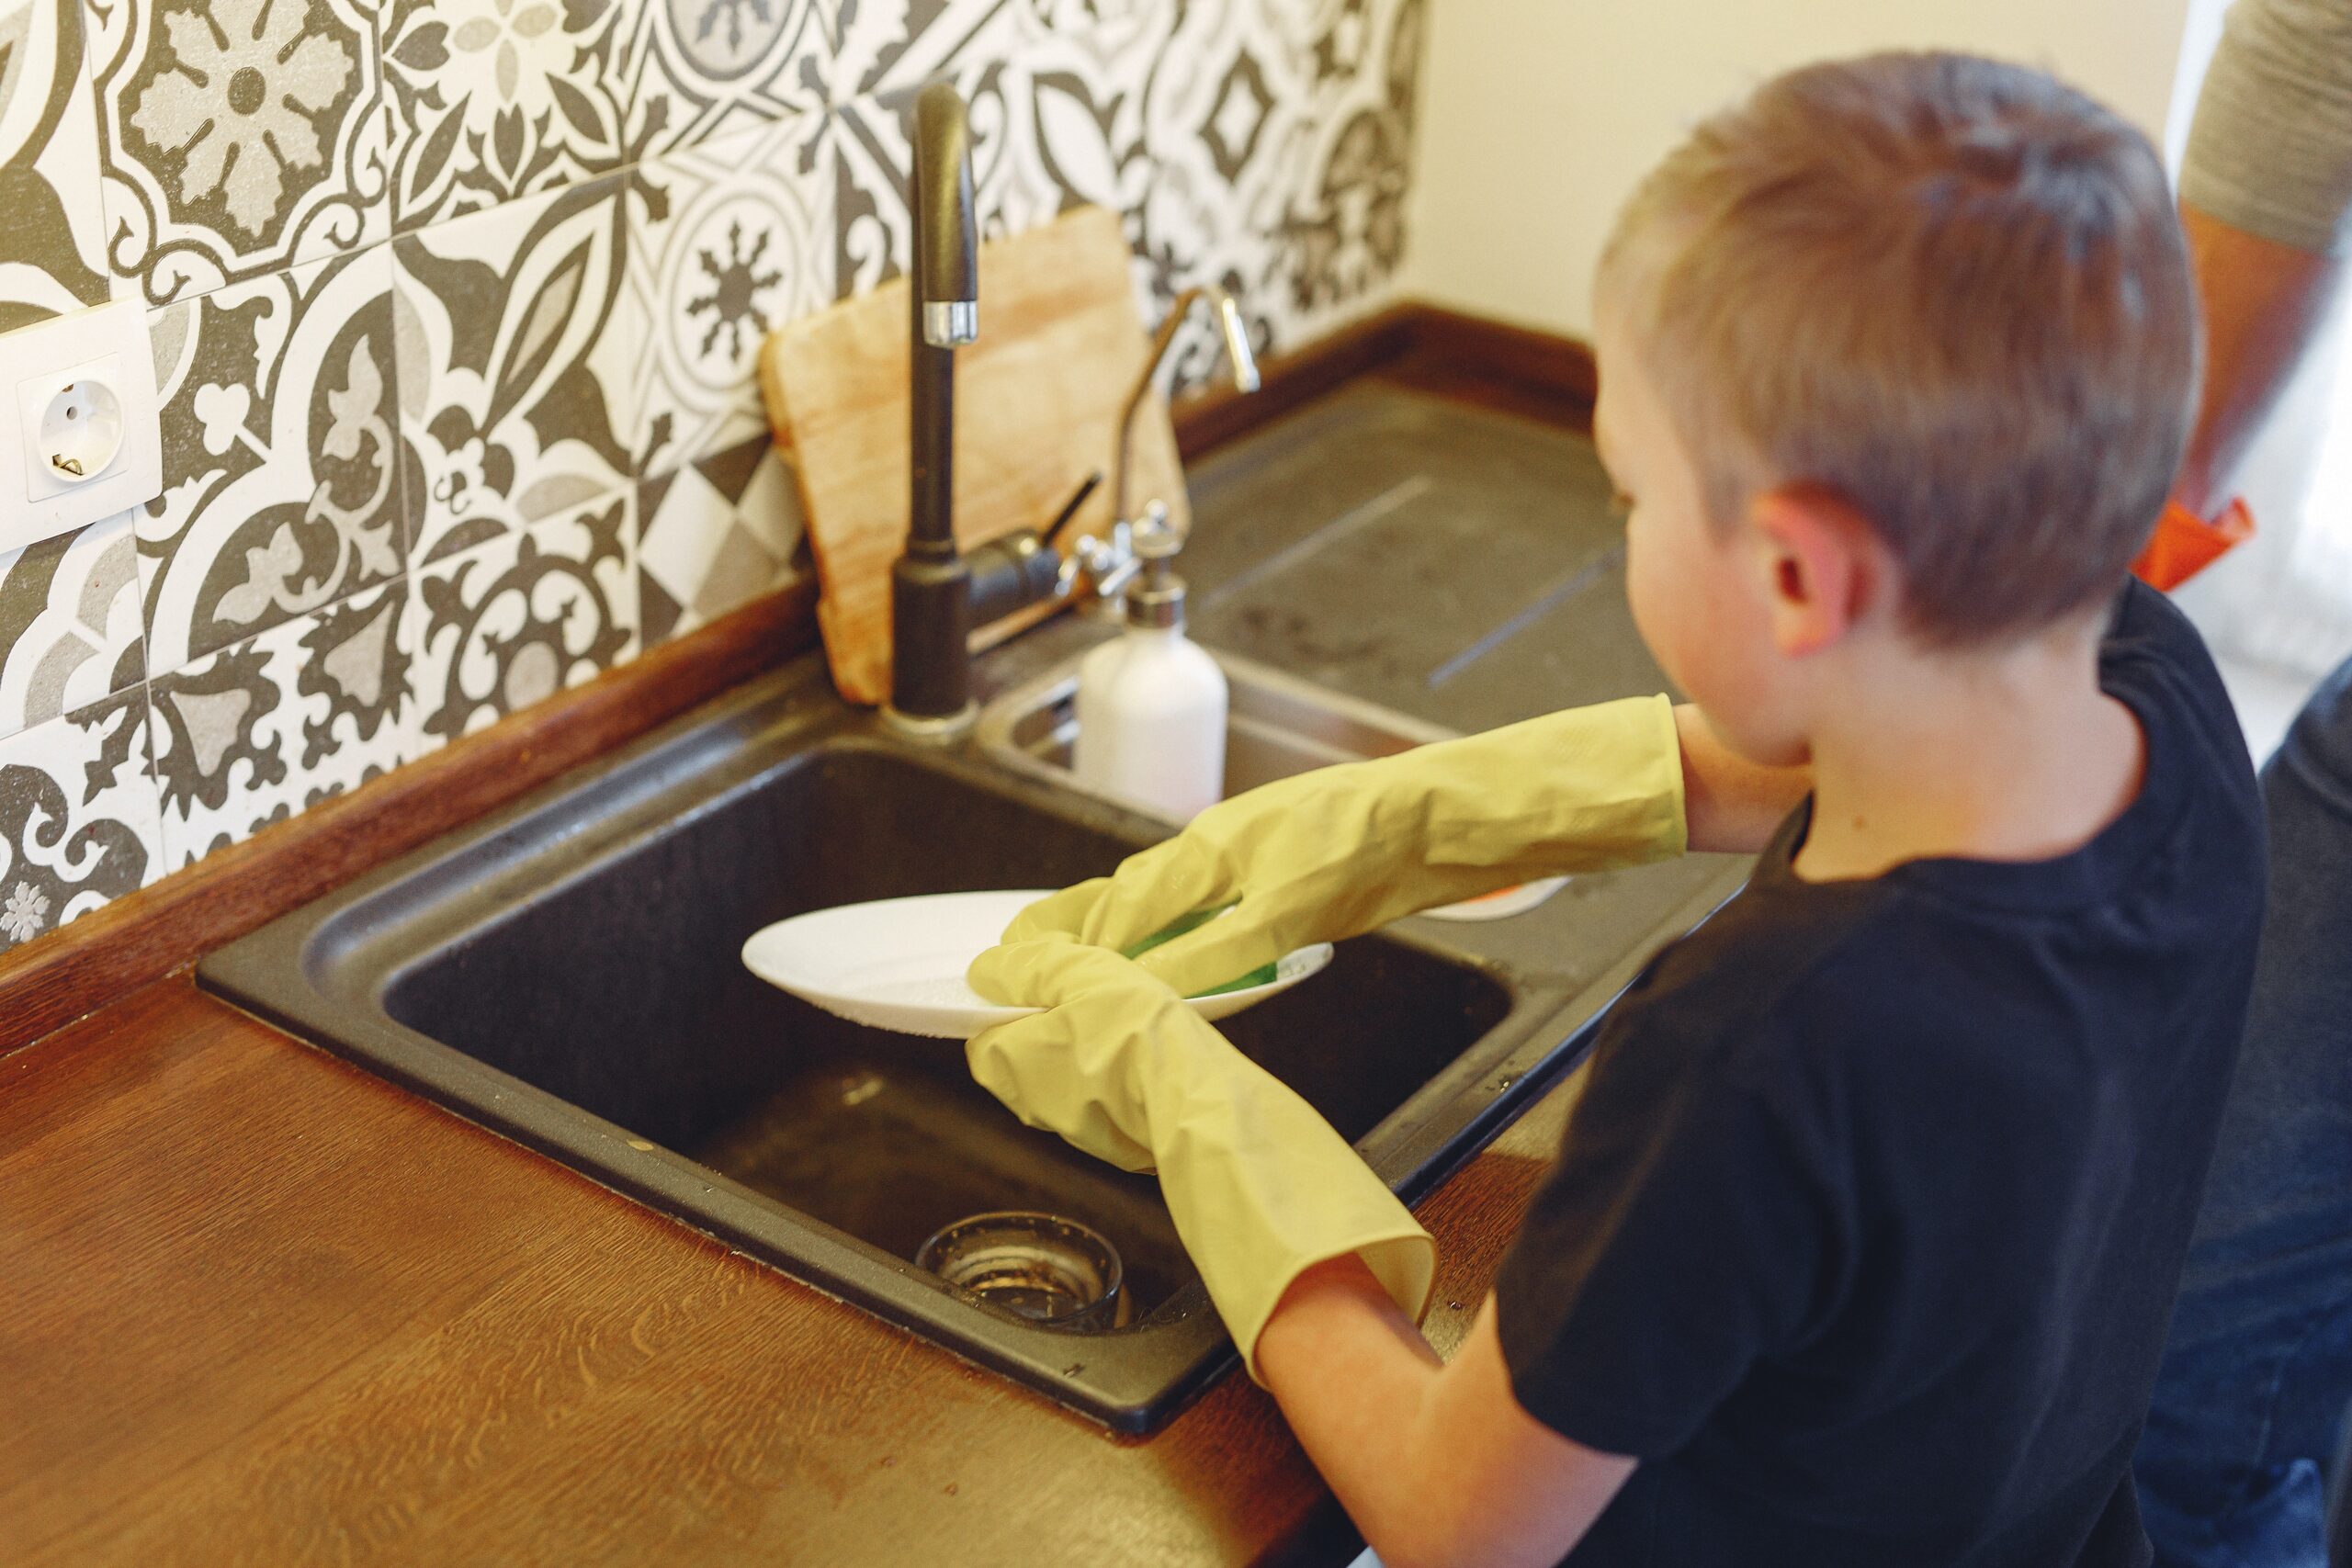 A boy in a black t-shirt is washing dishes